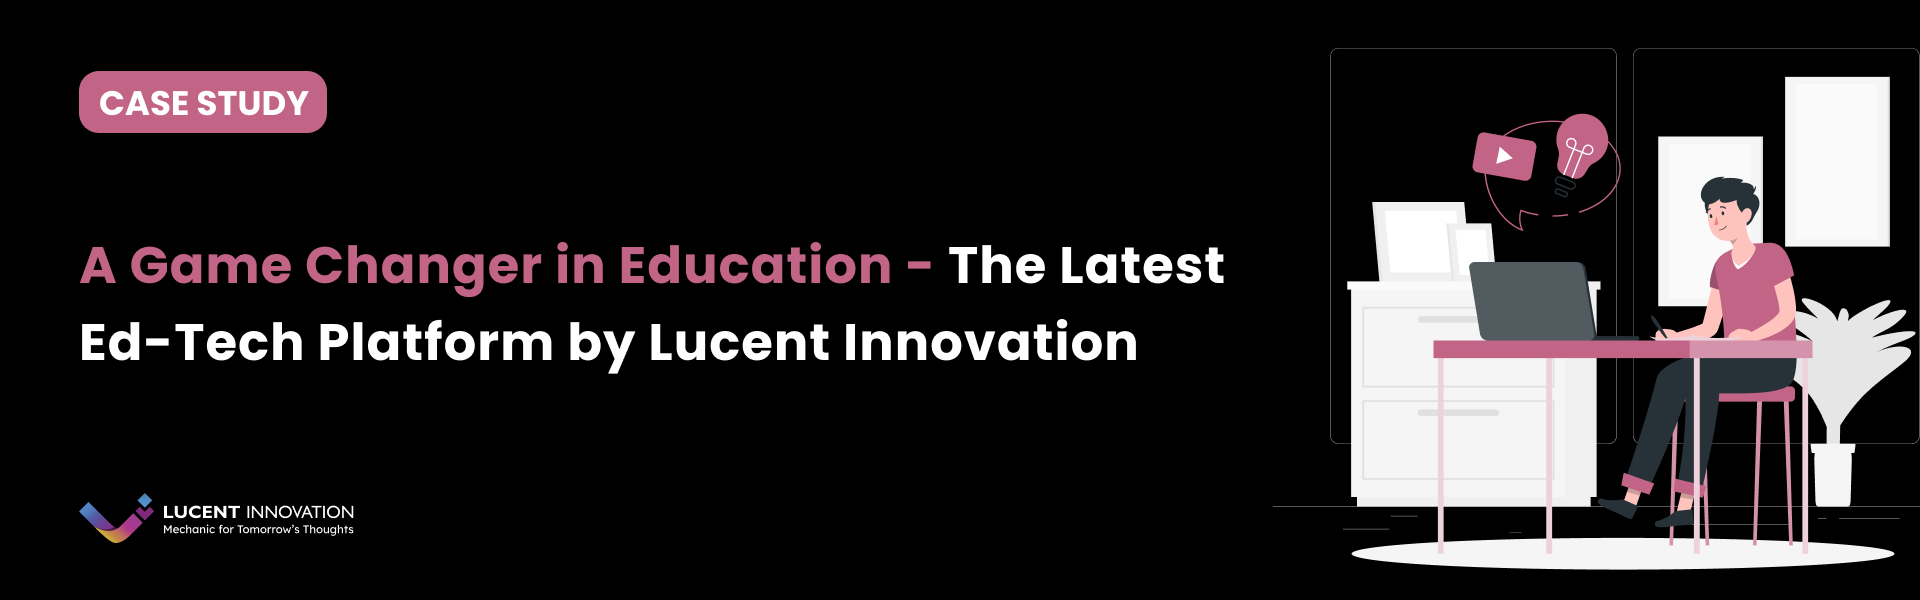 A game changer in Education - The latest Ed-tech platform by Lucent Innovation